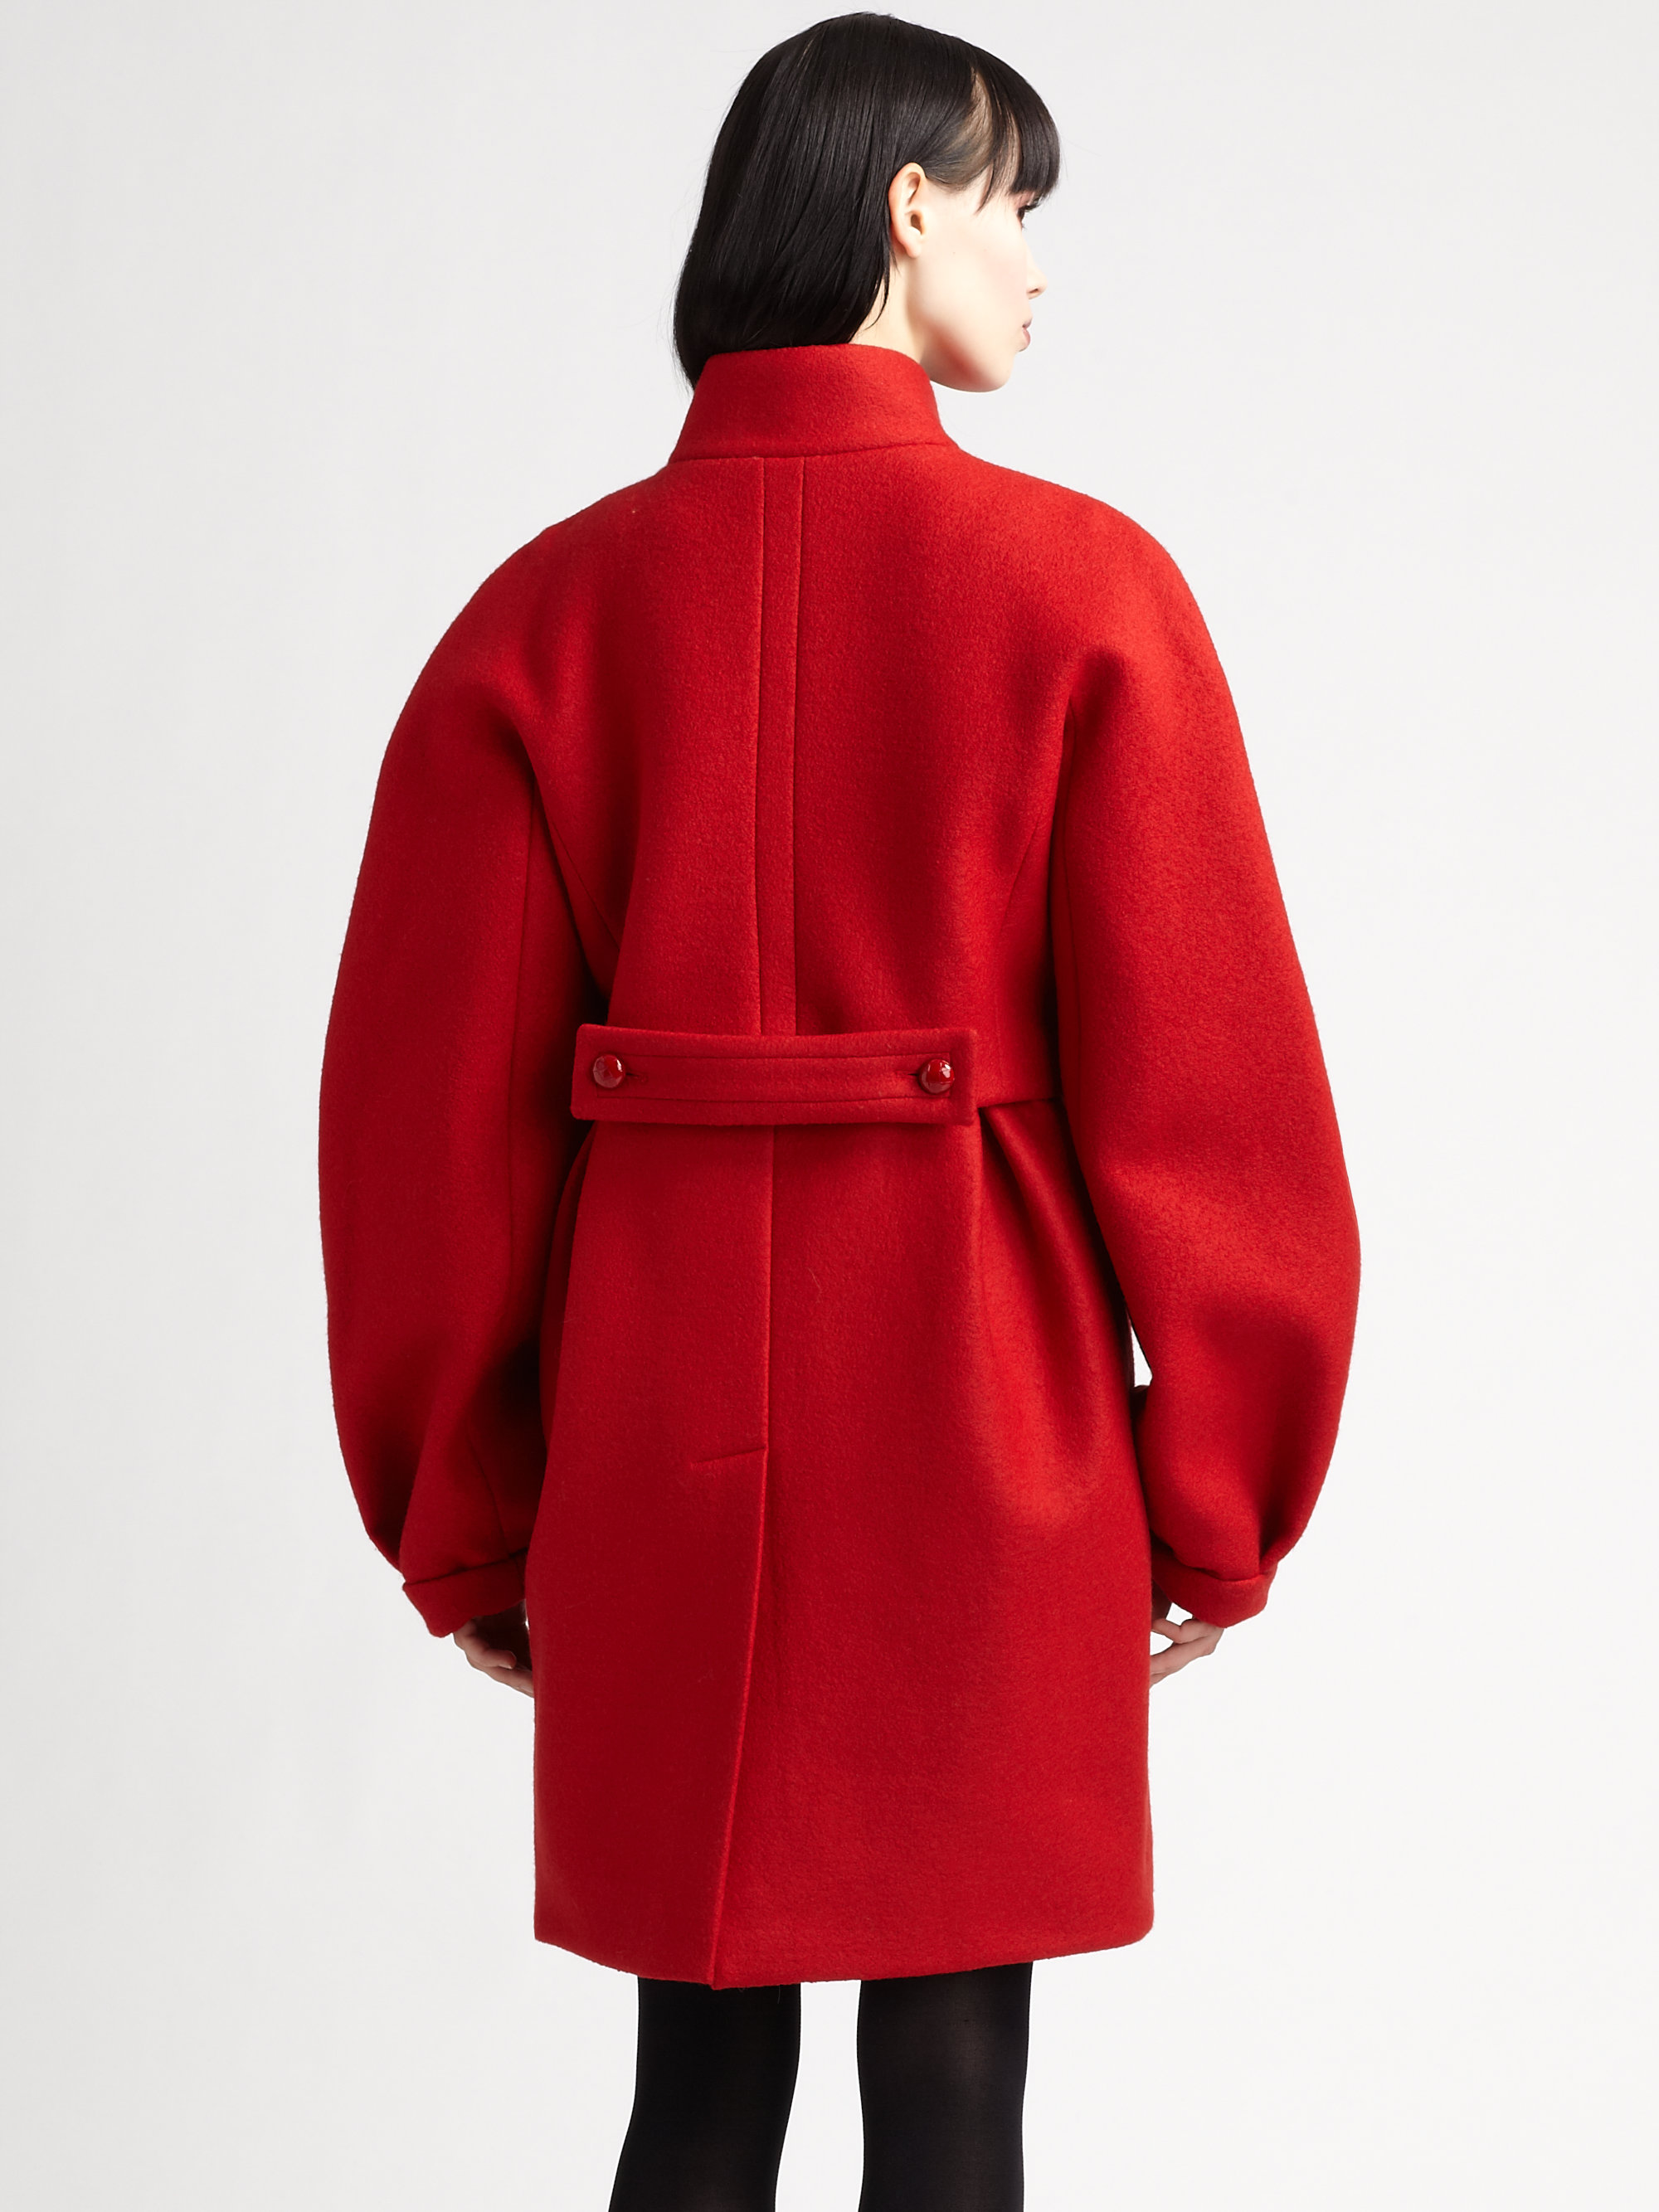 Burberry prorsum Wool Balloon Sleeve Coat in Red | Lyst